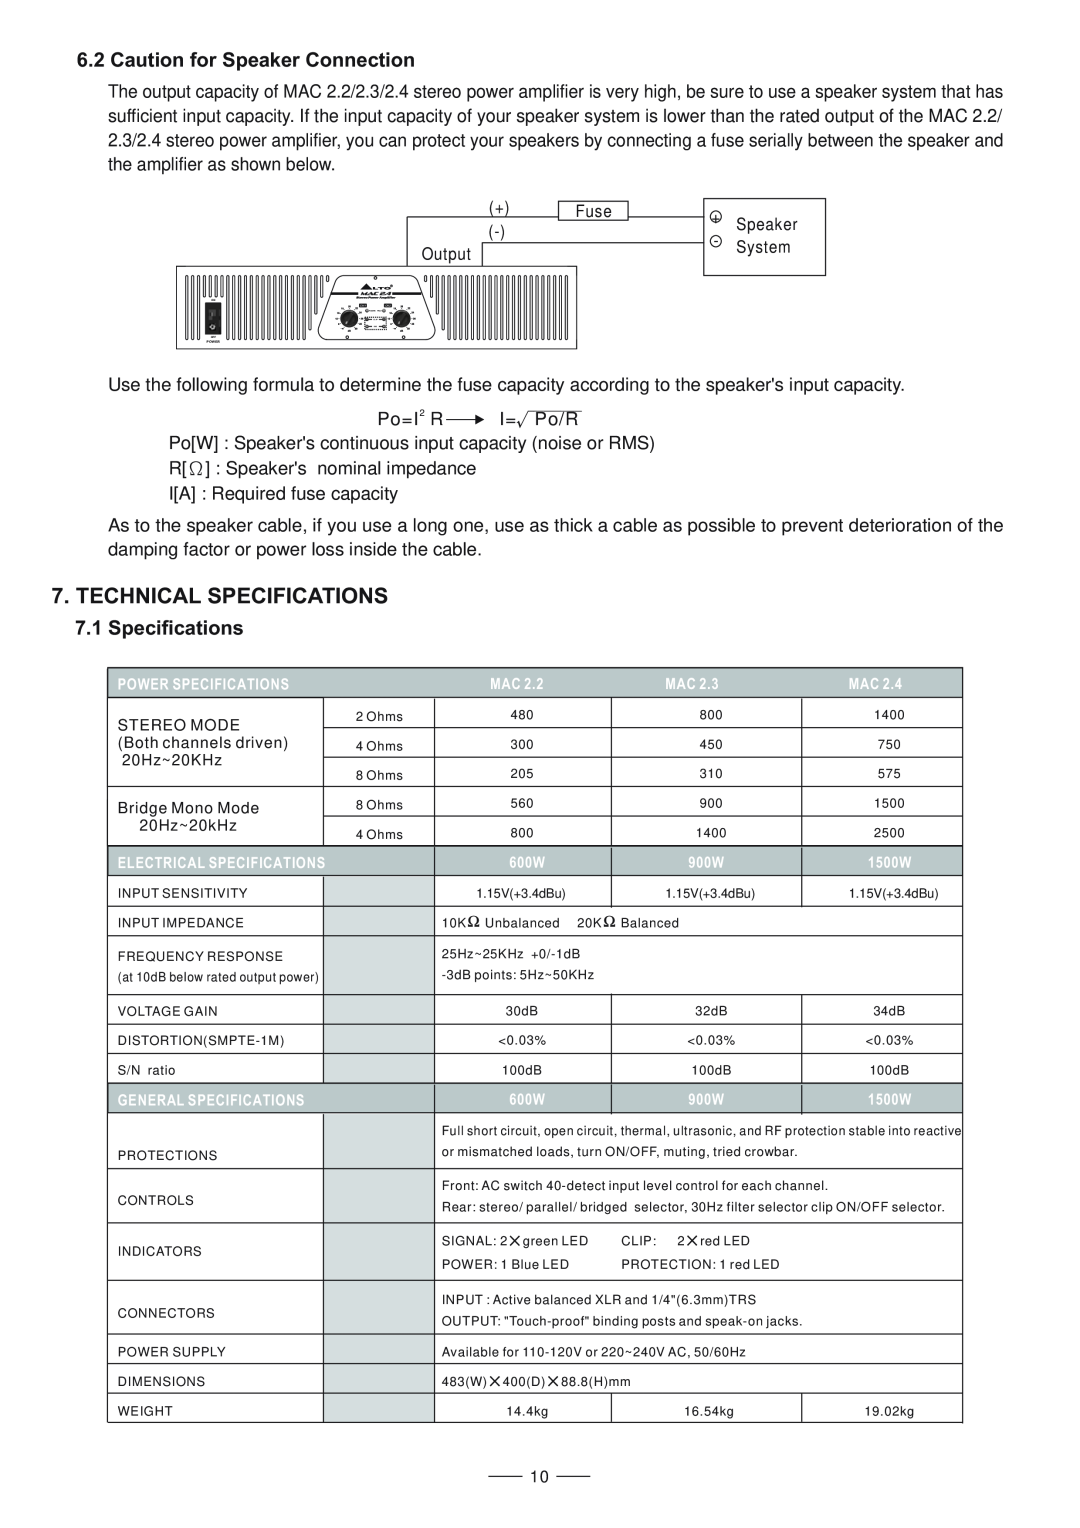 Nilfisk-ALTO MAC 2.2, MAC 2.3, MAC 2.4 Technical Specifications, Caution for Speaker Connection, 7.1Specifications 